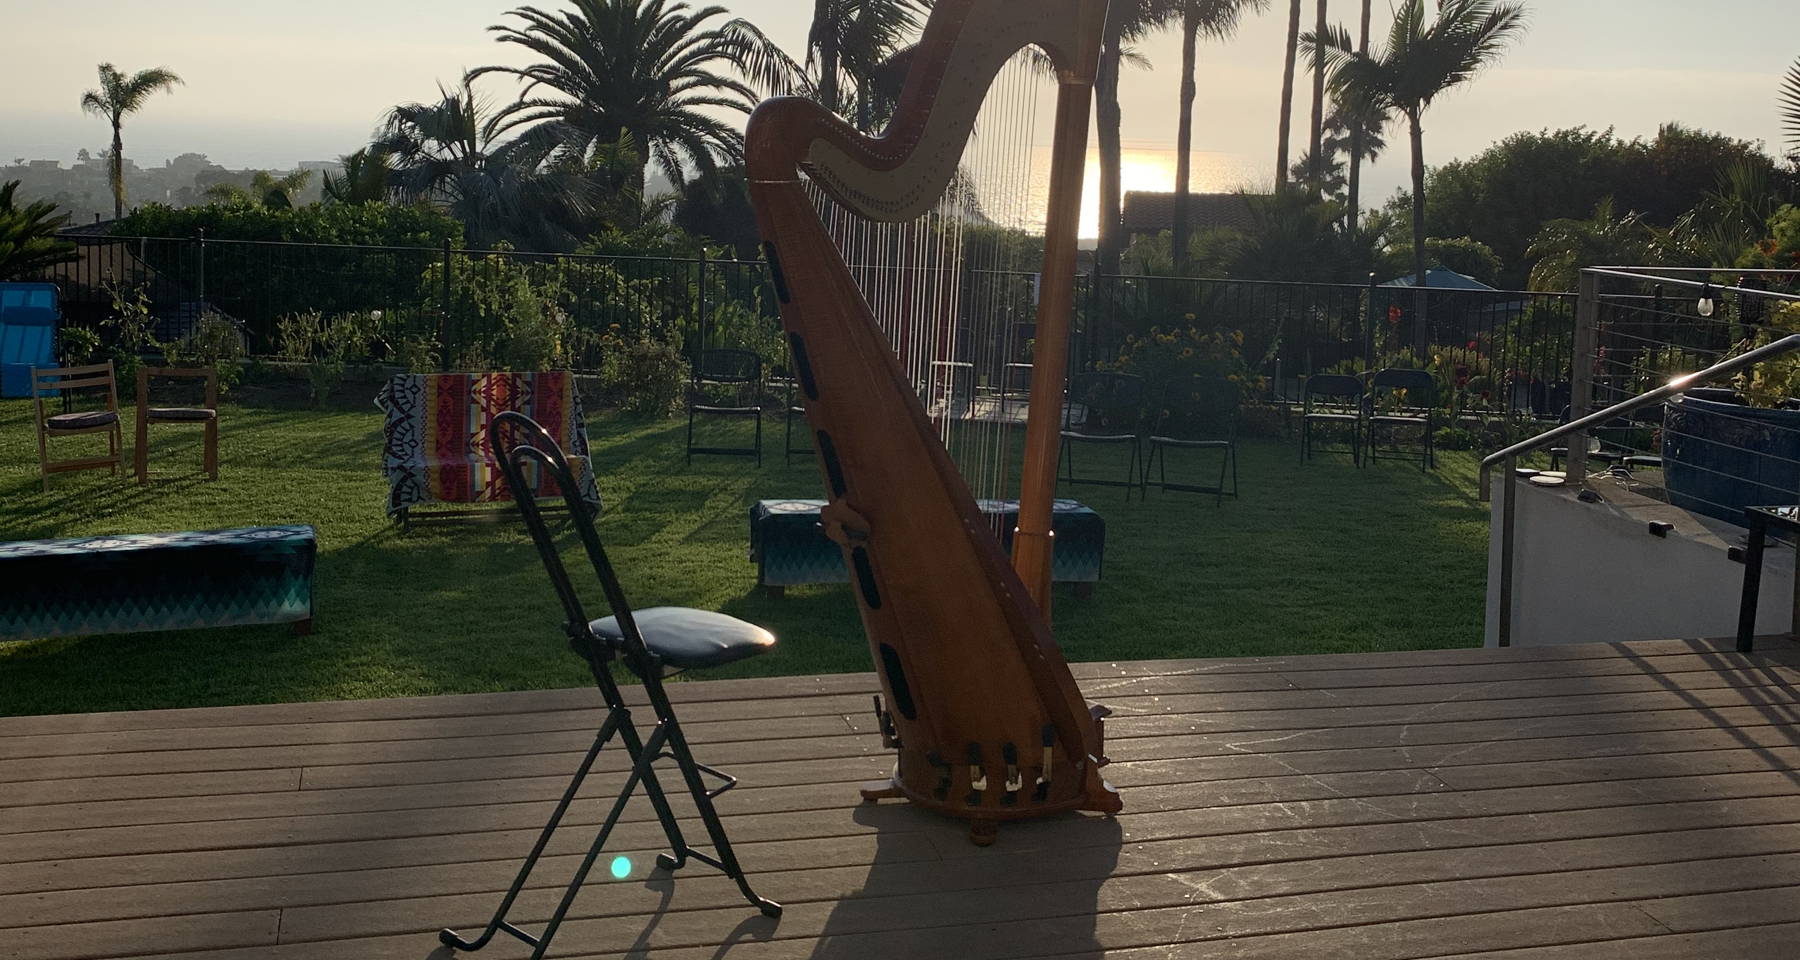 Cello and Violin: Afternoon Backyard Concert